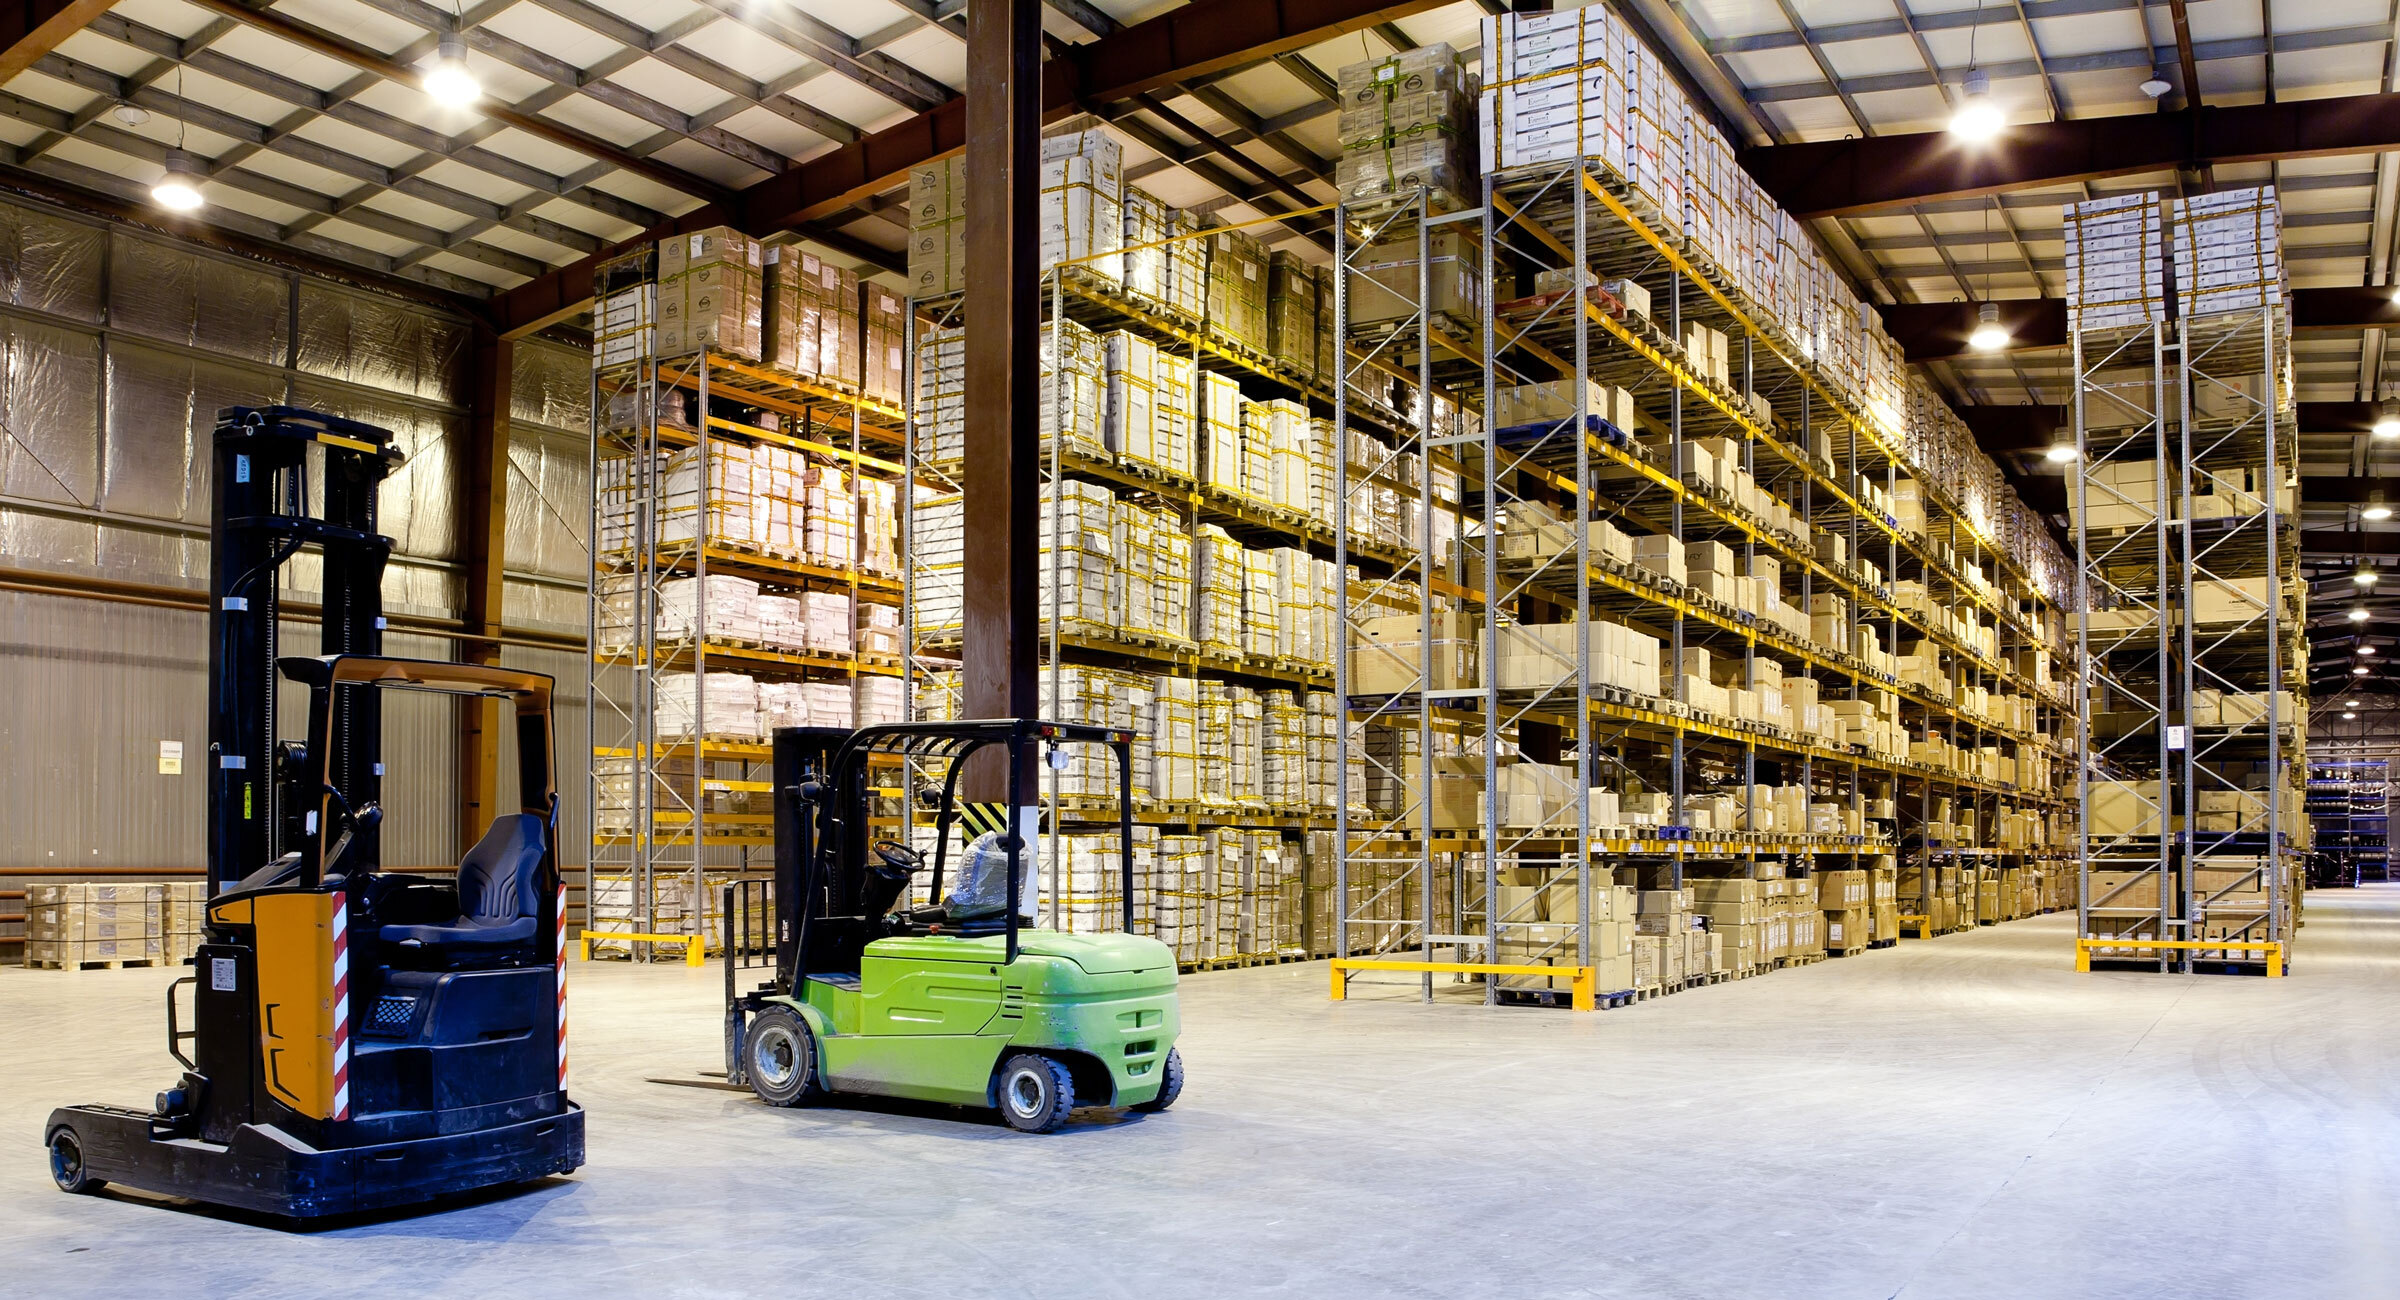 Forklifts are parked in a large warehouse facility. 